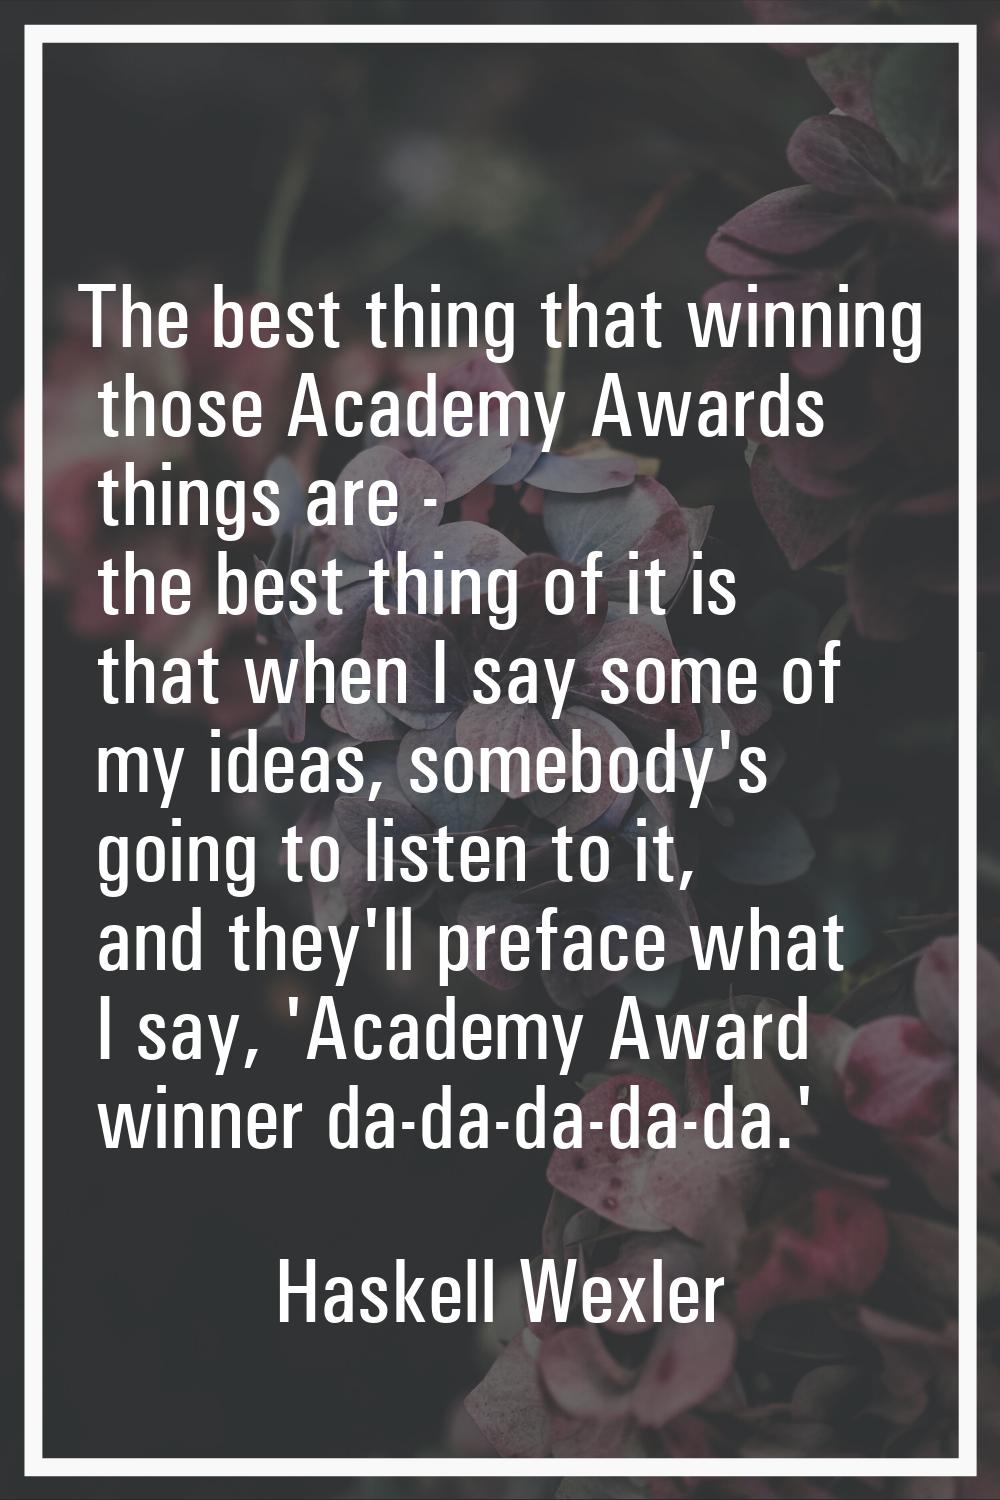 The best thing that winning those Academy Awards things are - the best thing of it is that when I s